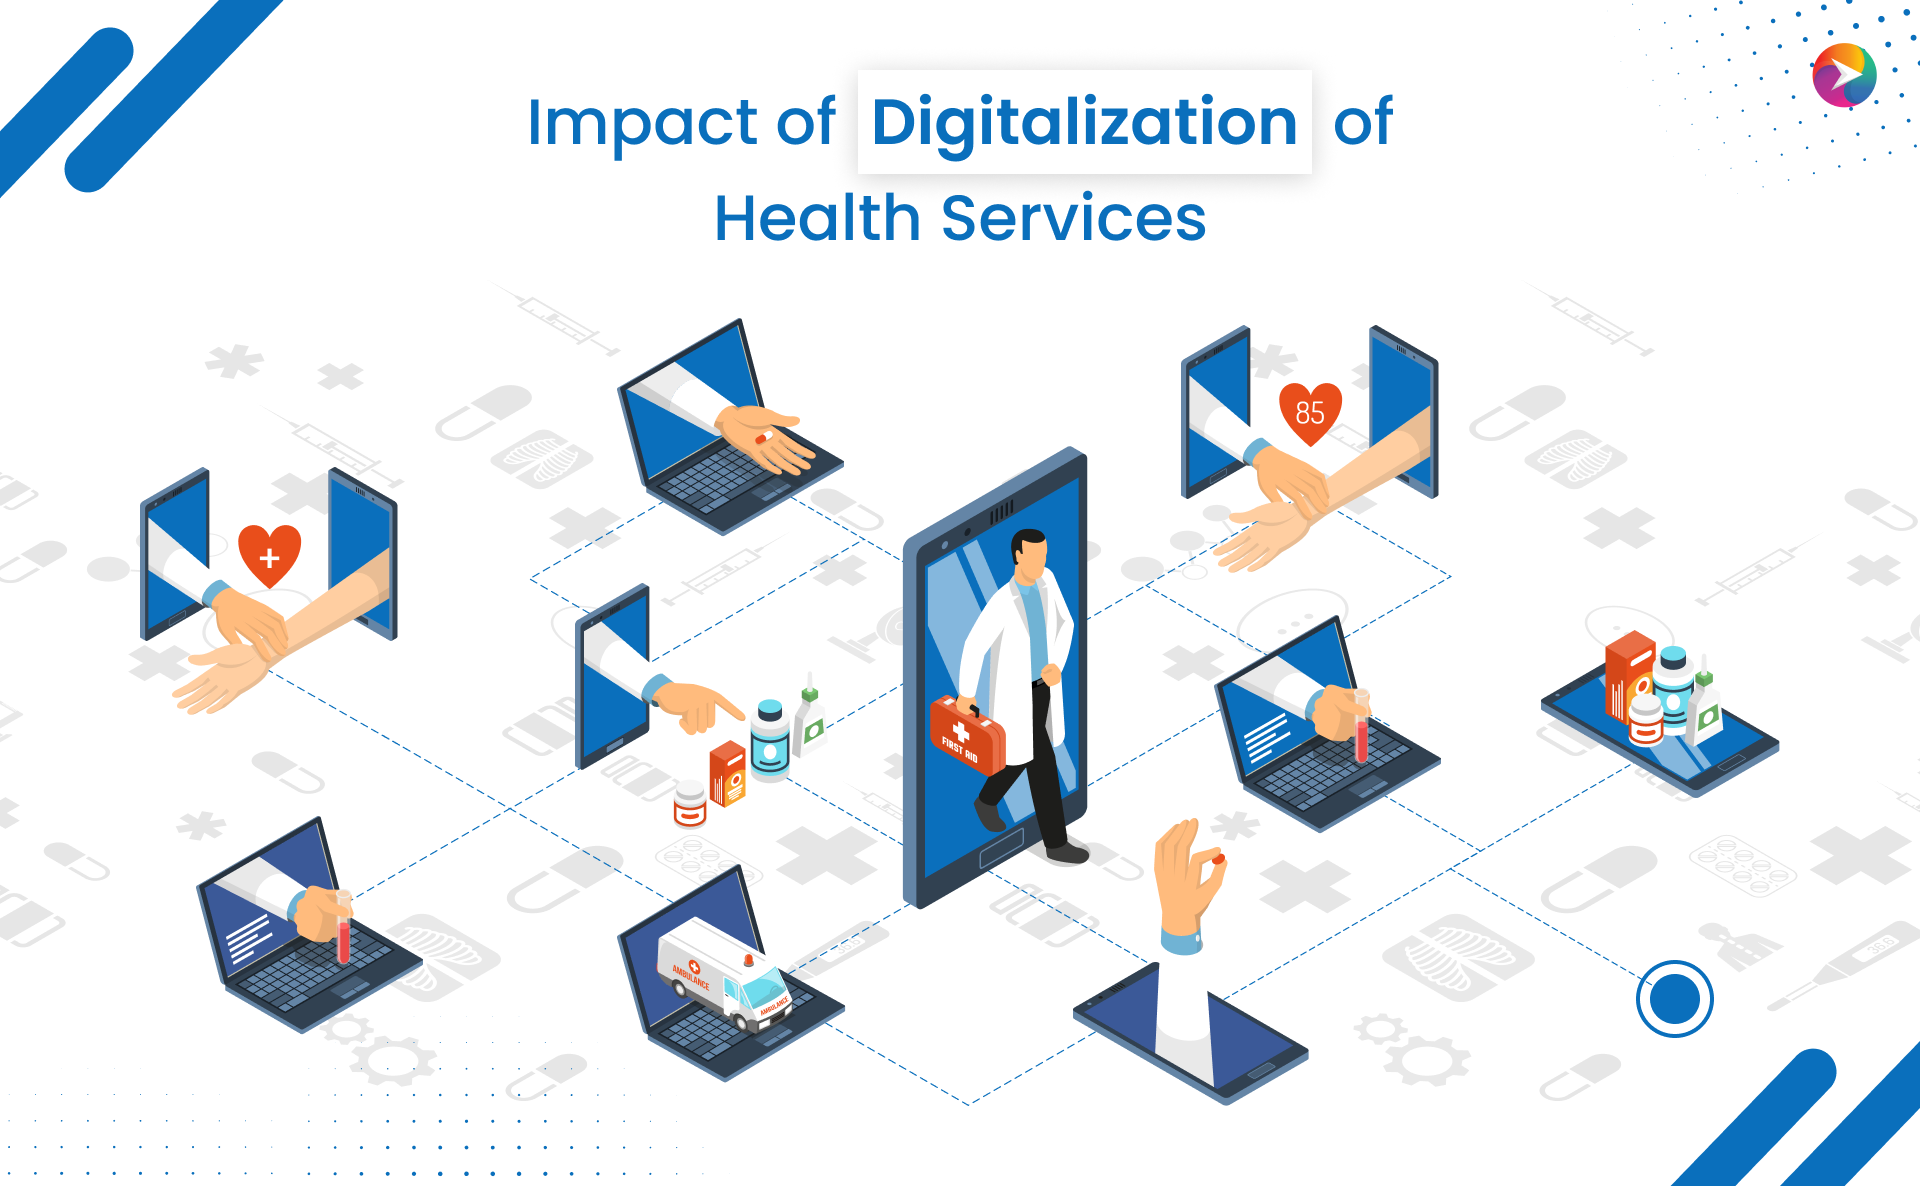 Impact of Digitalization of Health Services